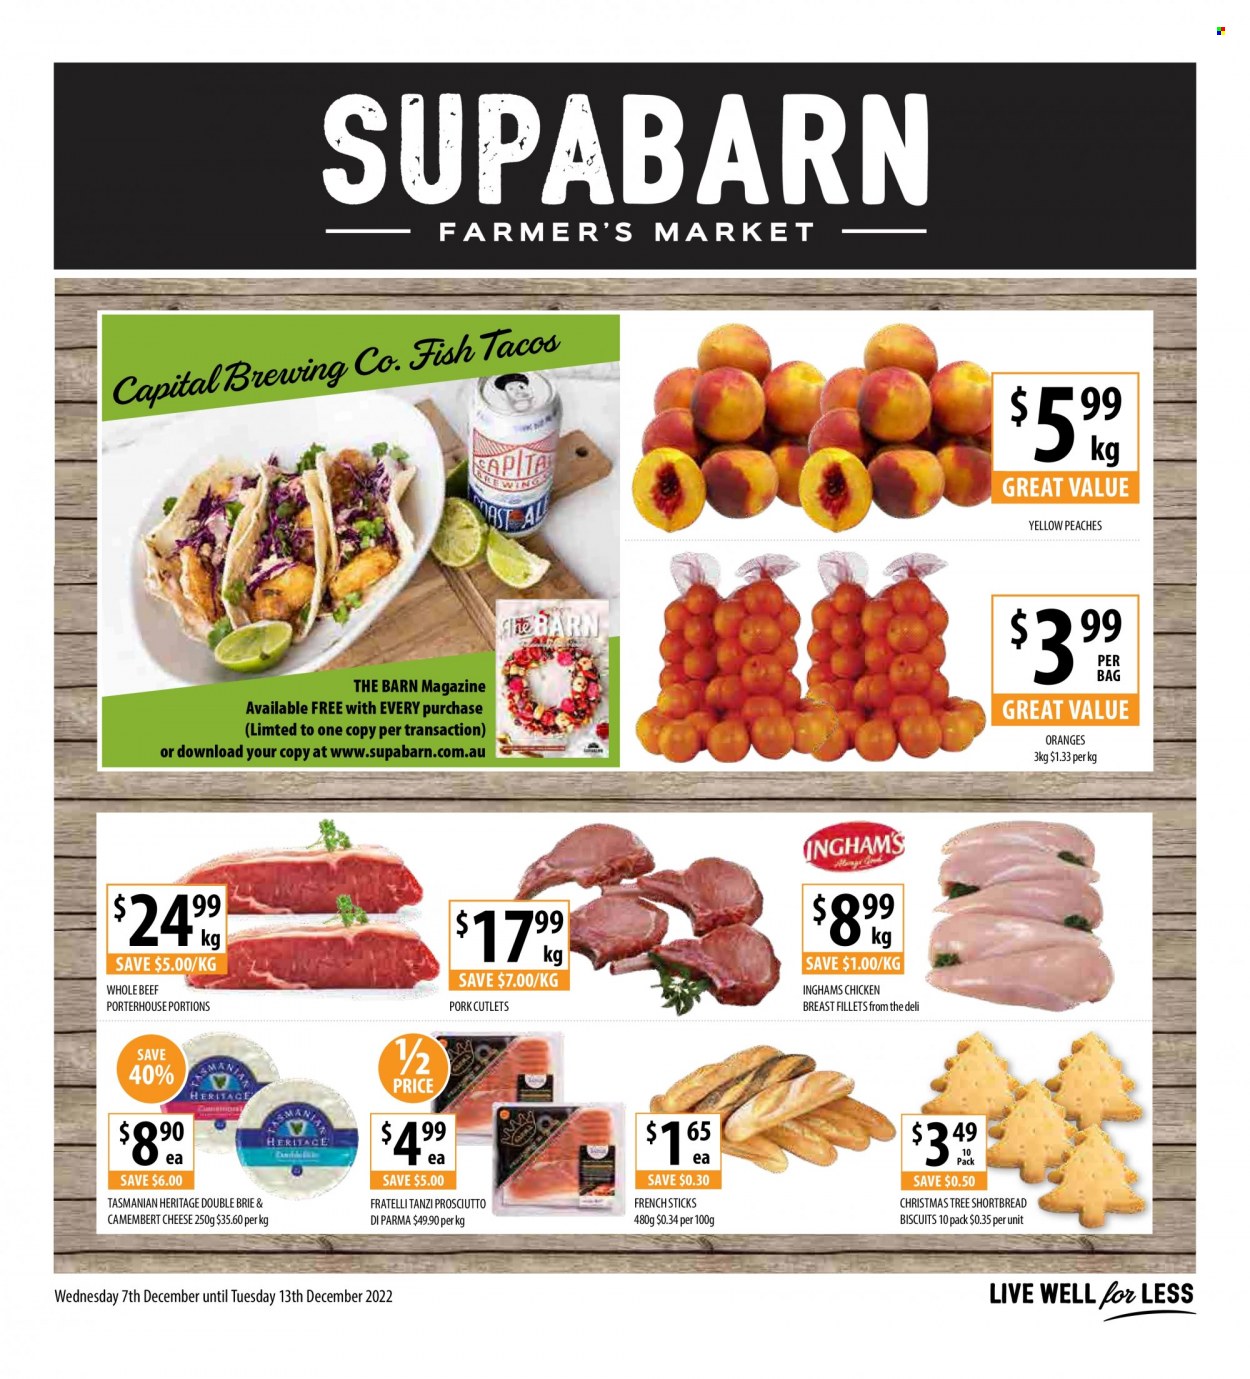 thumbnail - Supabarn Catalogue - 7 Dec 2022 - 13 Dec 2022 - Sales products - tacos, oranges, peaches, fish, prosciutto, camembert, cheese, brie, Tasmanian Heritage, biscuit, chicken breasts, bag. Page 1.